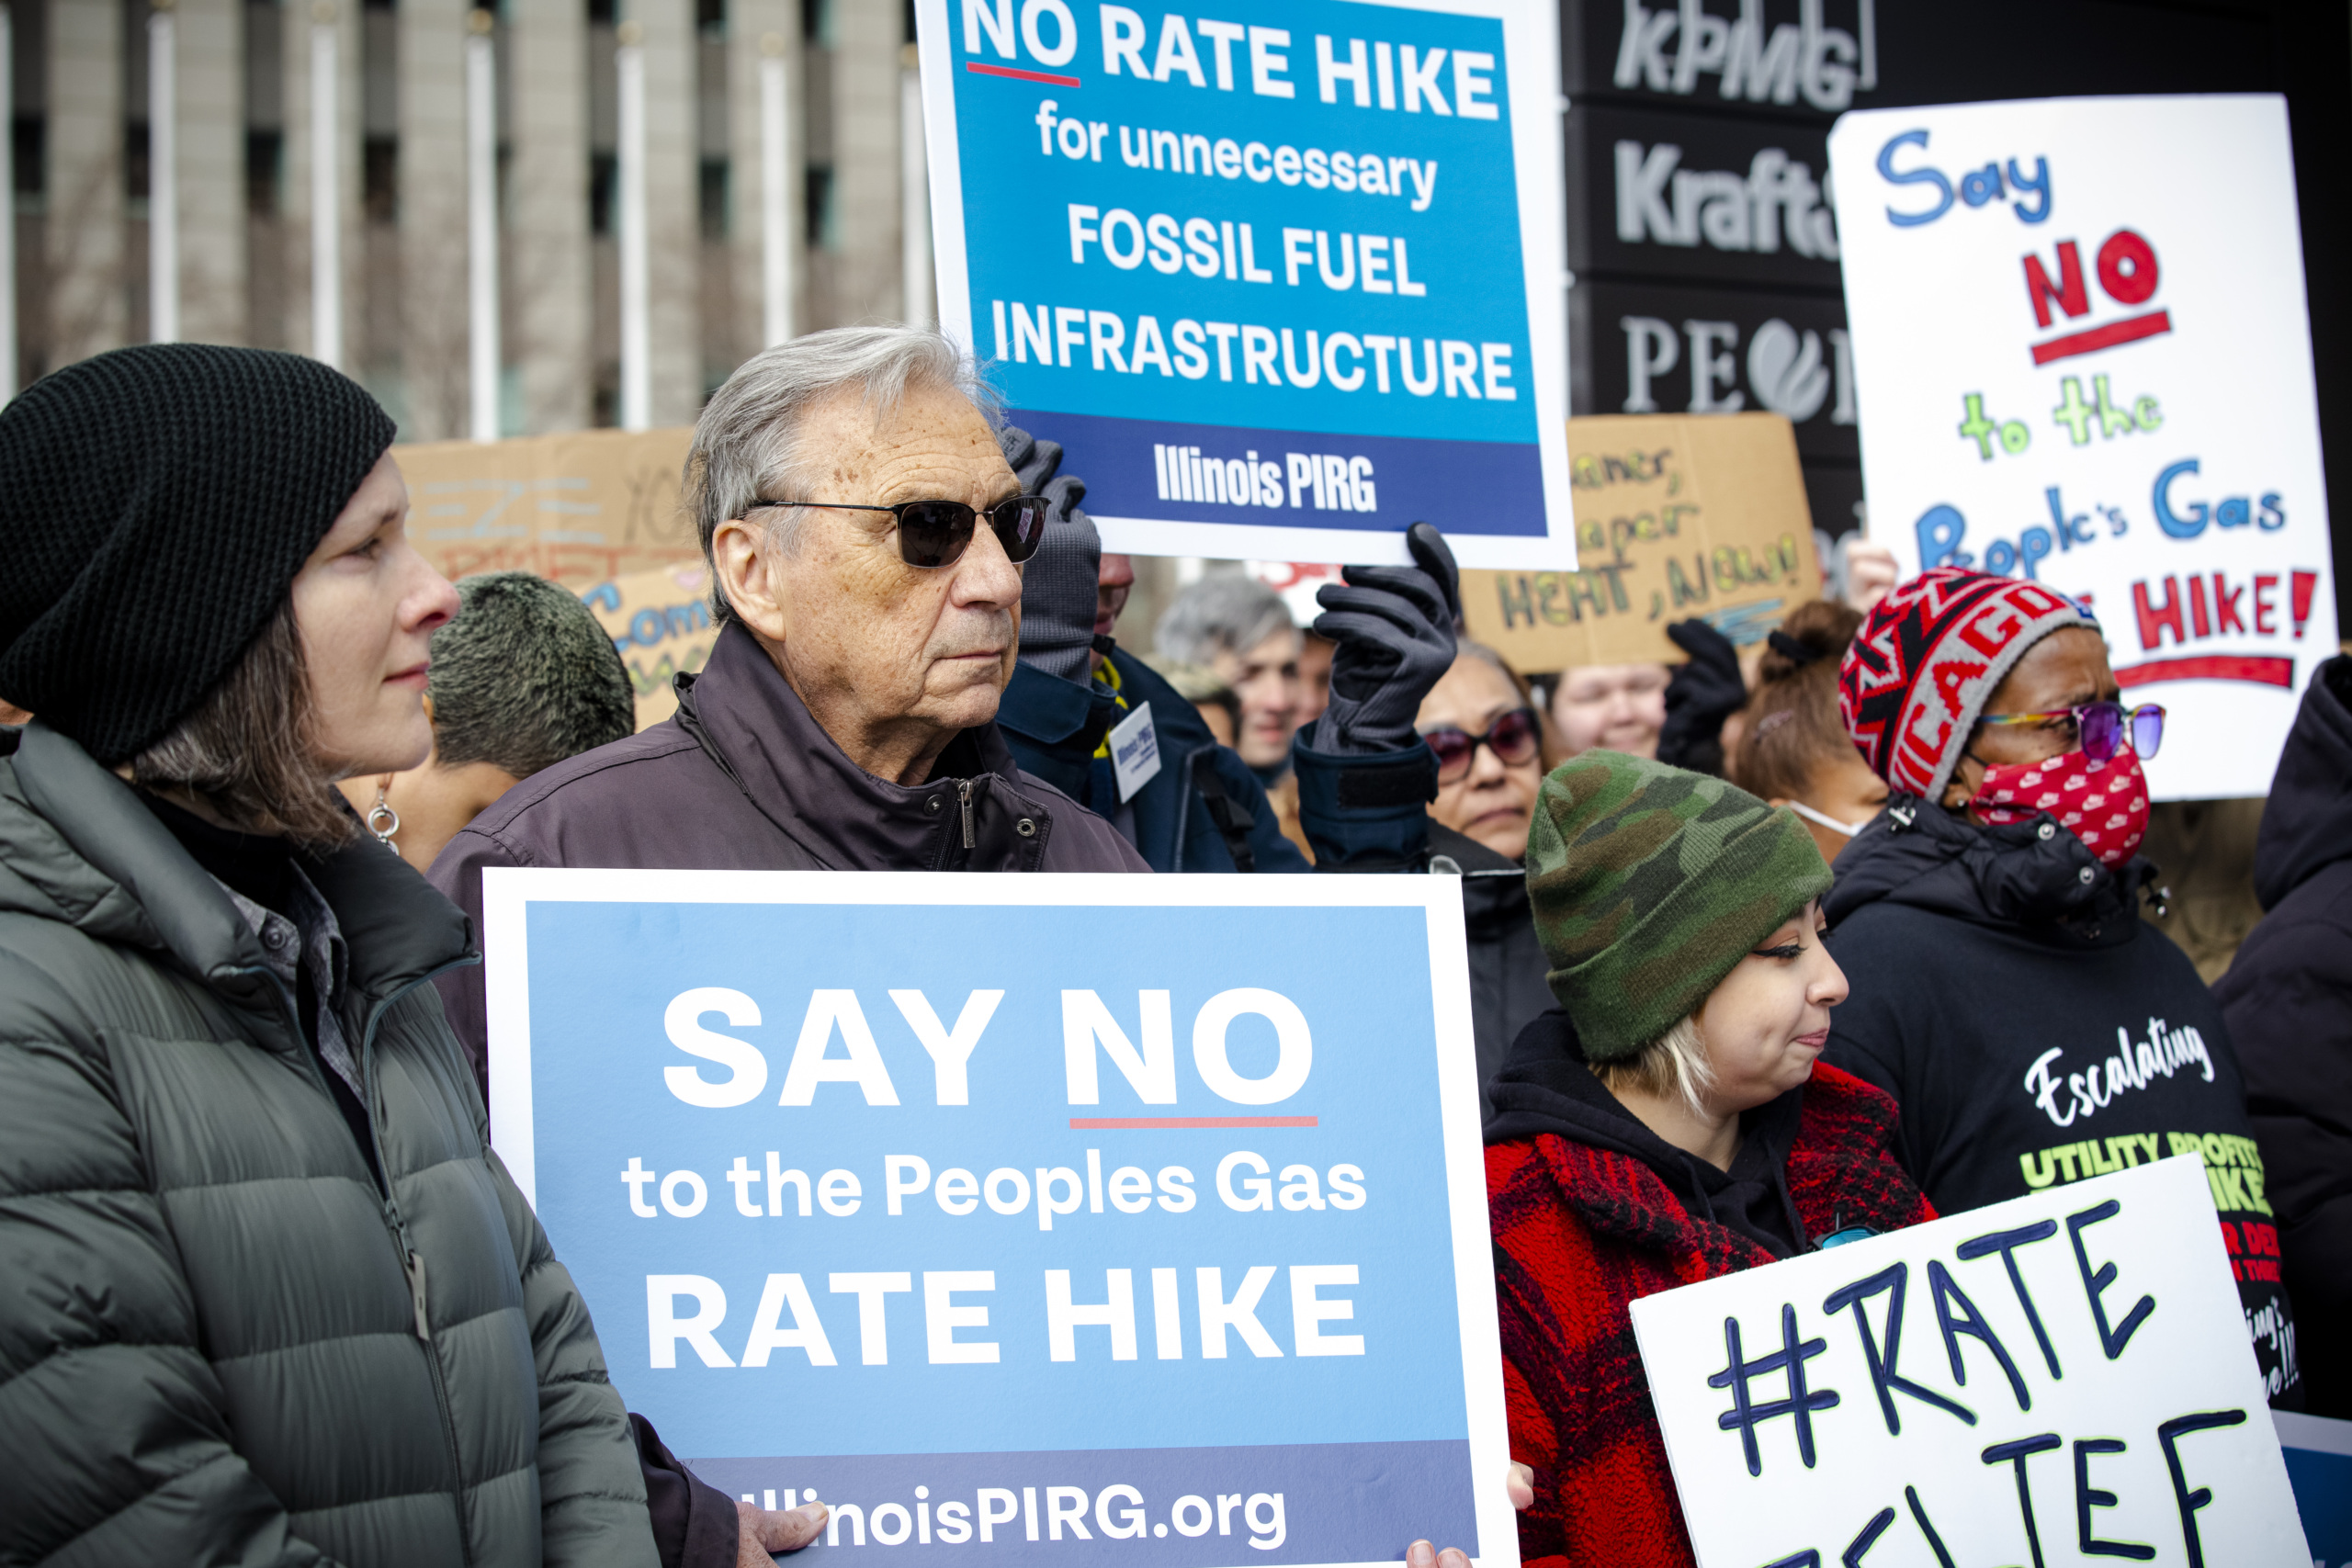 A rally against the Peoples Gas rate hike